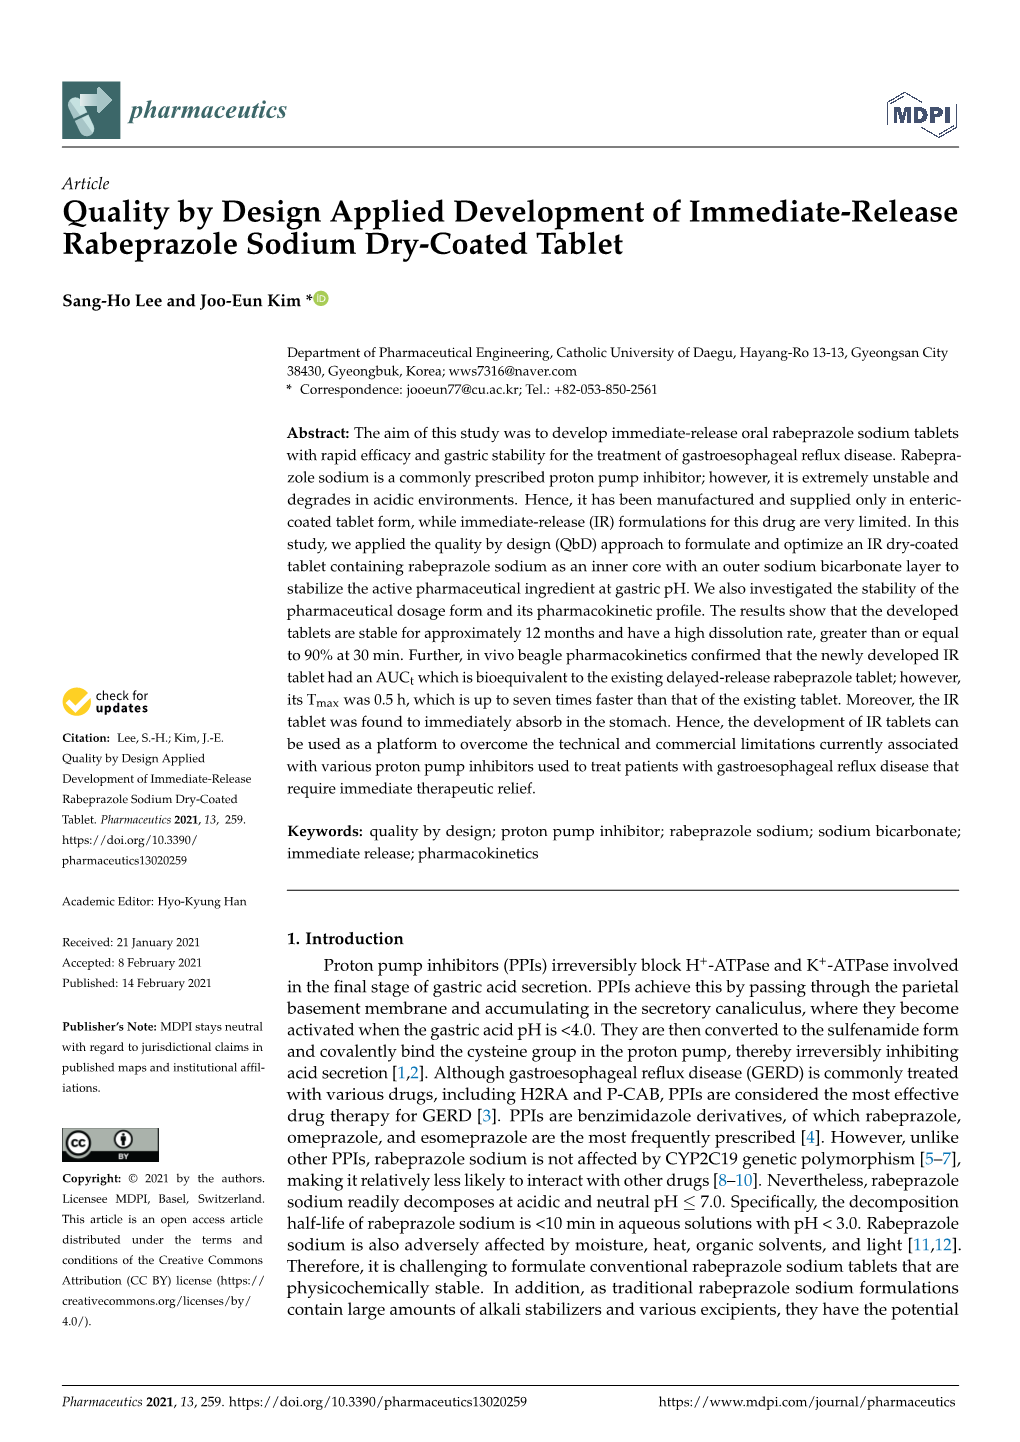 Quality by Design Applied Development of Immediate-Release Rabeprazole Sodium Dry-Coated Tablet